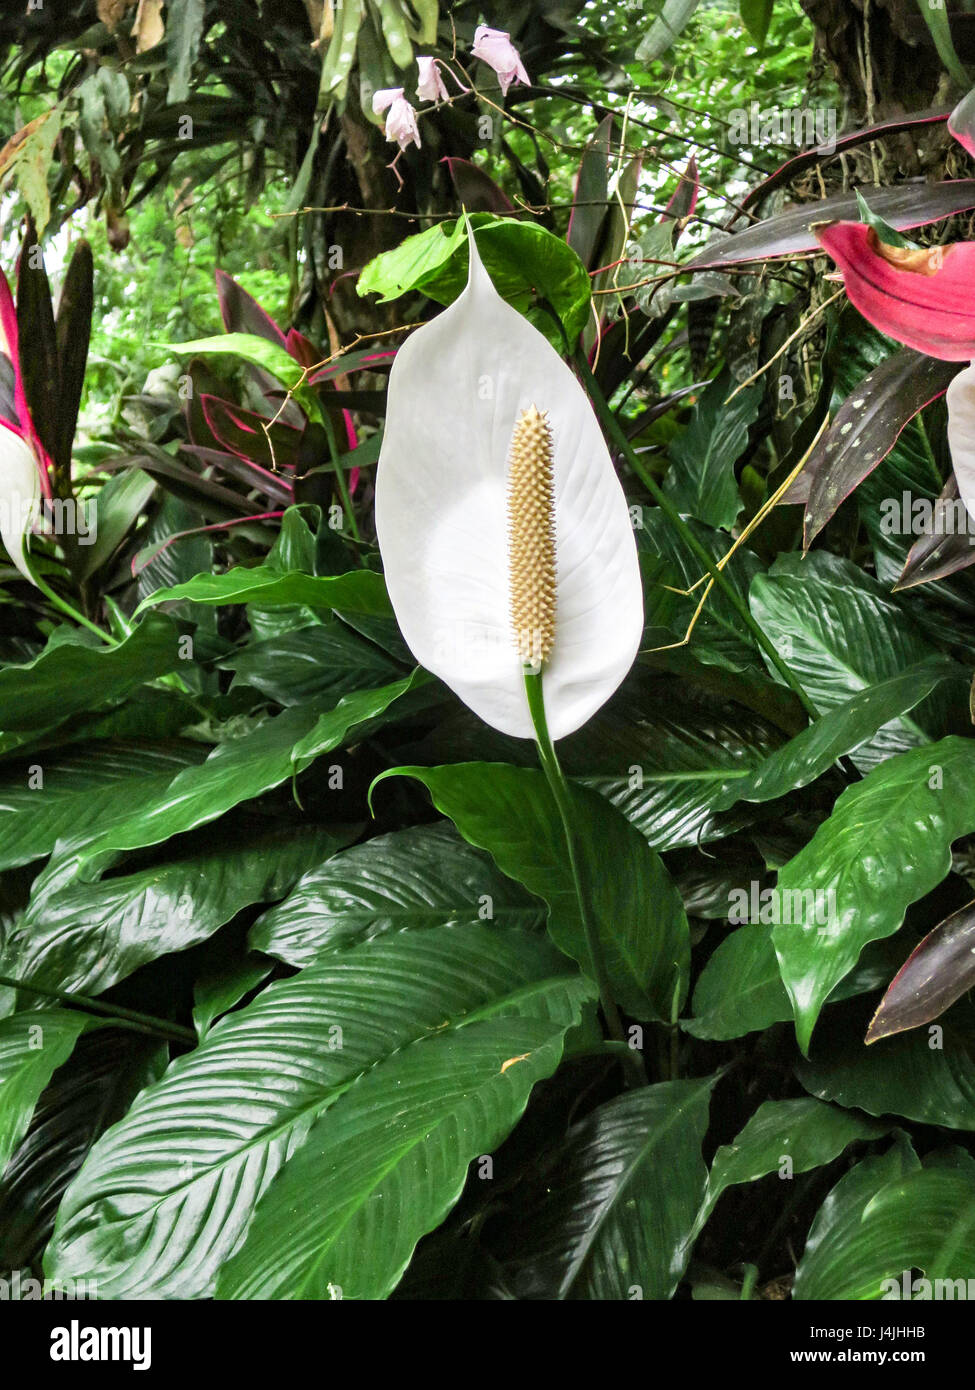 Peace lily, Spathiphyllum cochlearispathum, a/k/a White Sails and Spathe Flower, spadix and spathe. Stock Photo